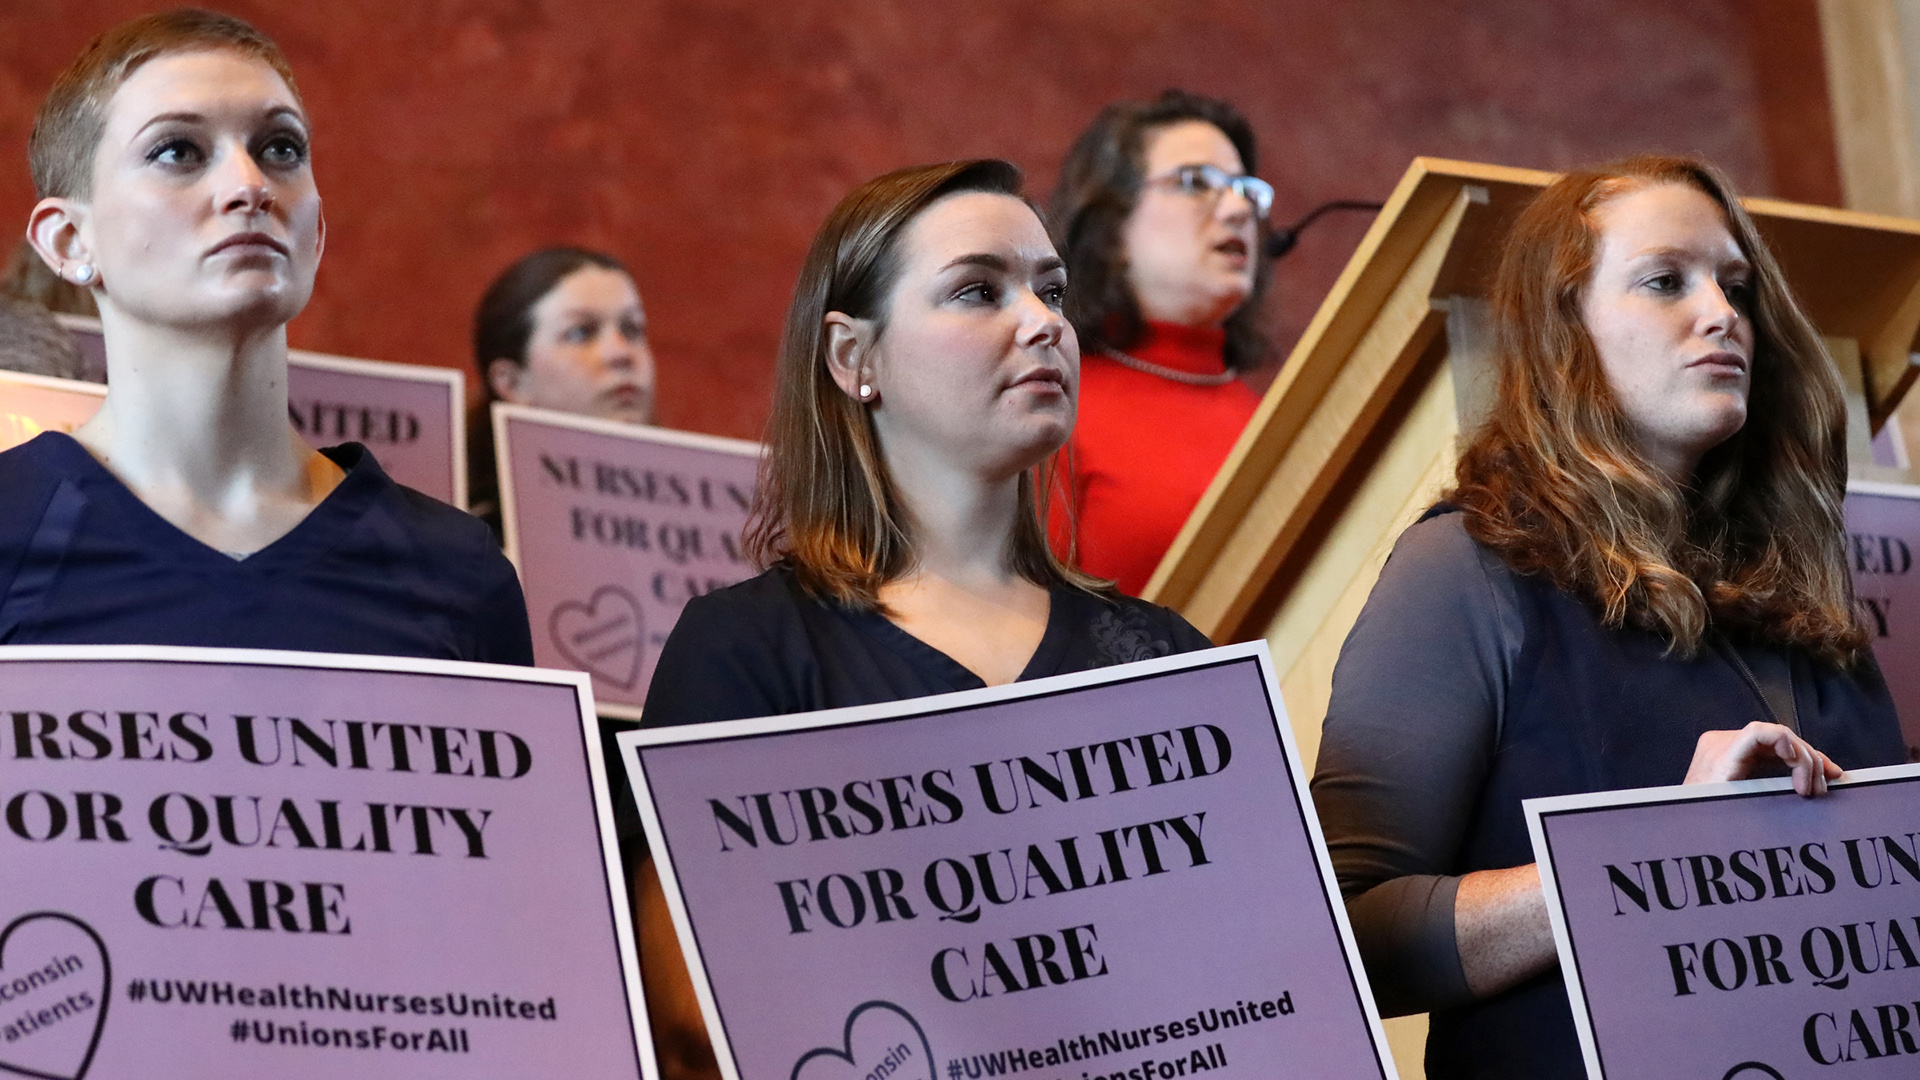 Courtney Maurer and others stand in a line while holding a sign that reads "Nurses United for Quality Care," with more people holding these signs in the background.